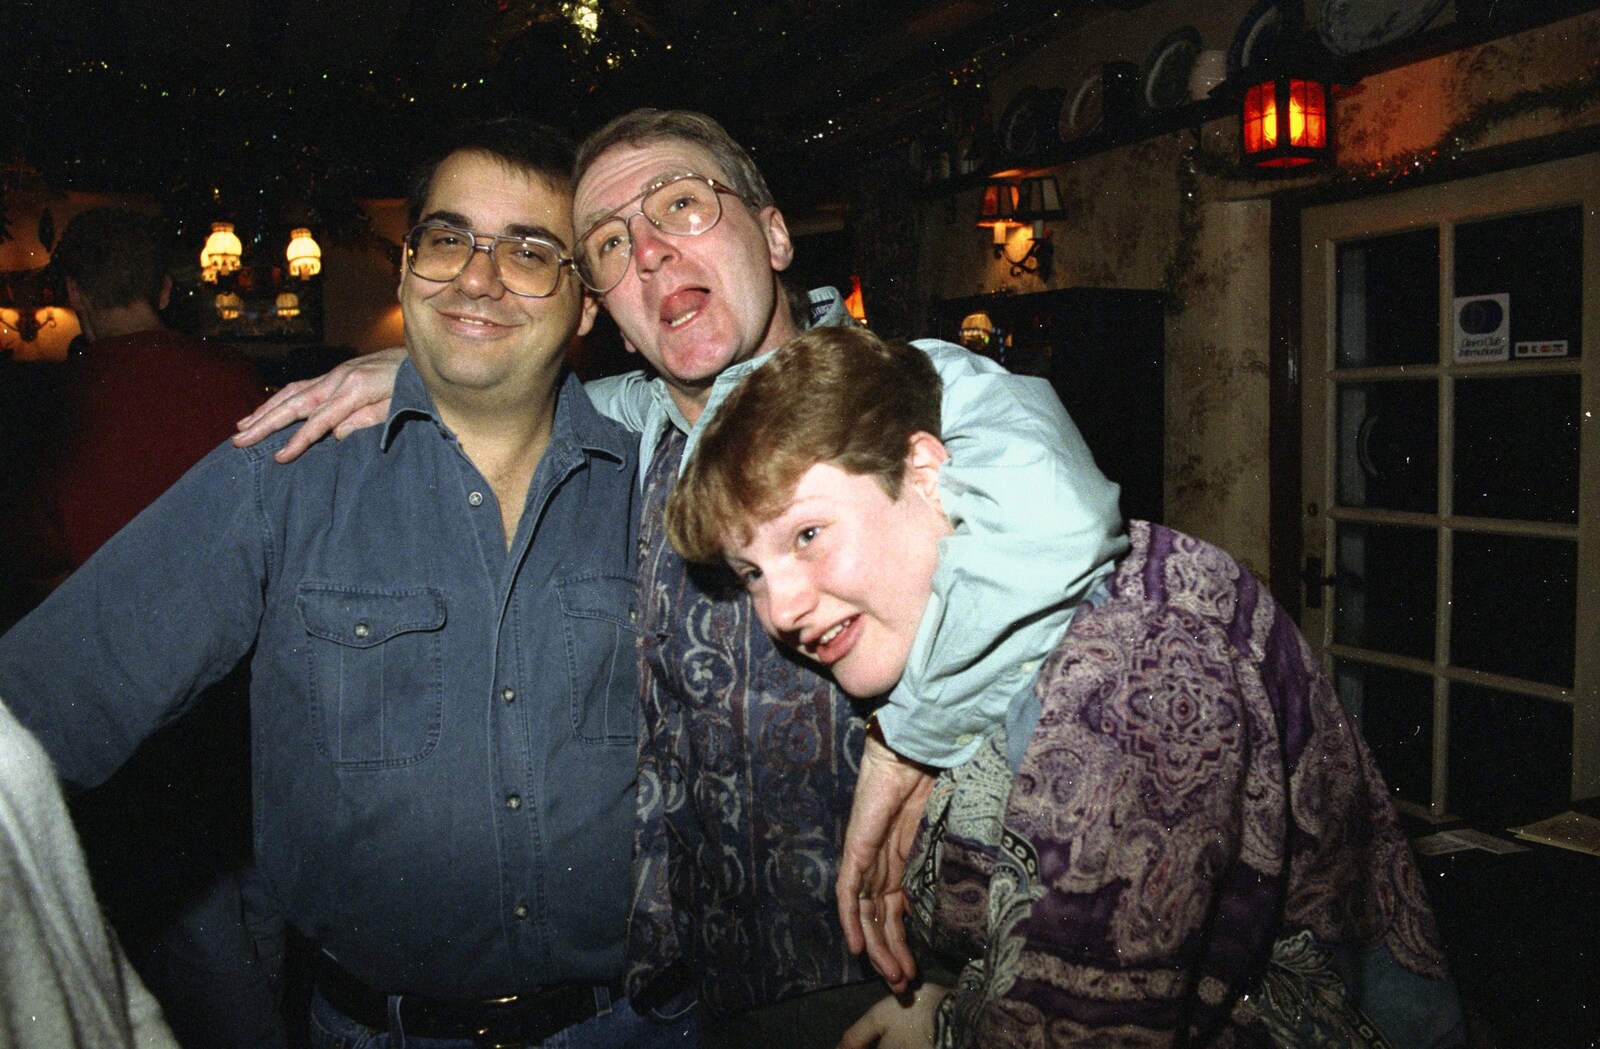 Roger, John Willy and Sally from New Year's Eve at the Swan Inn, Brome, Suffolk - 31st December 1994